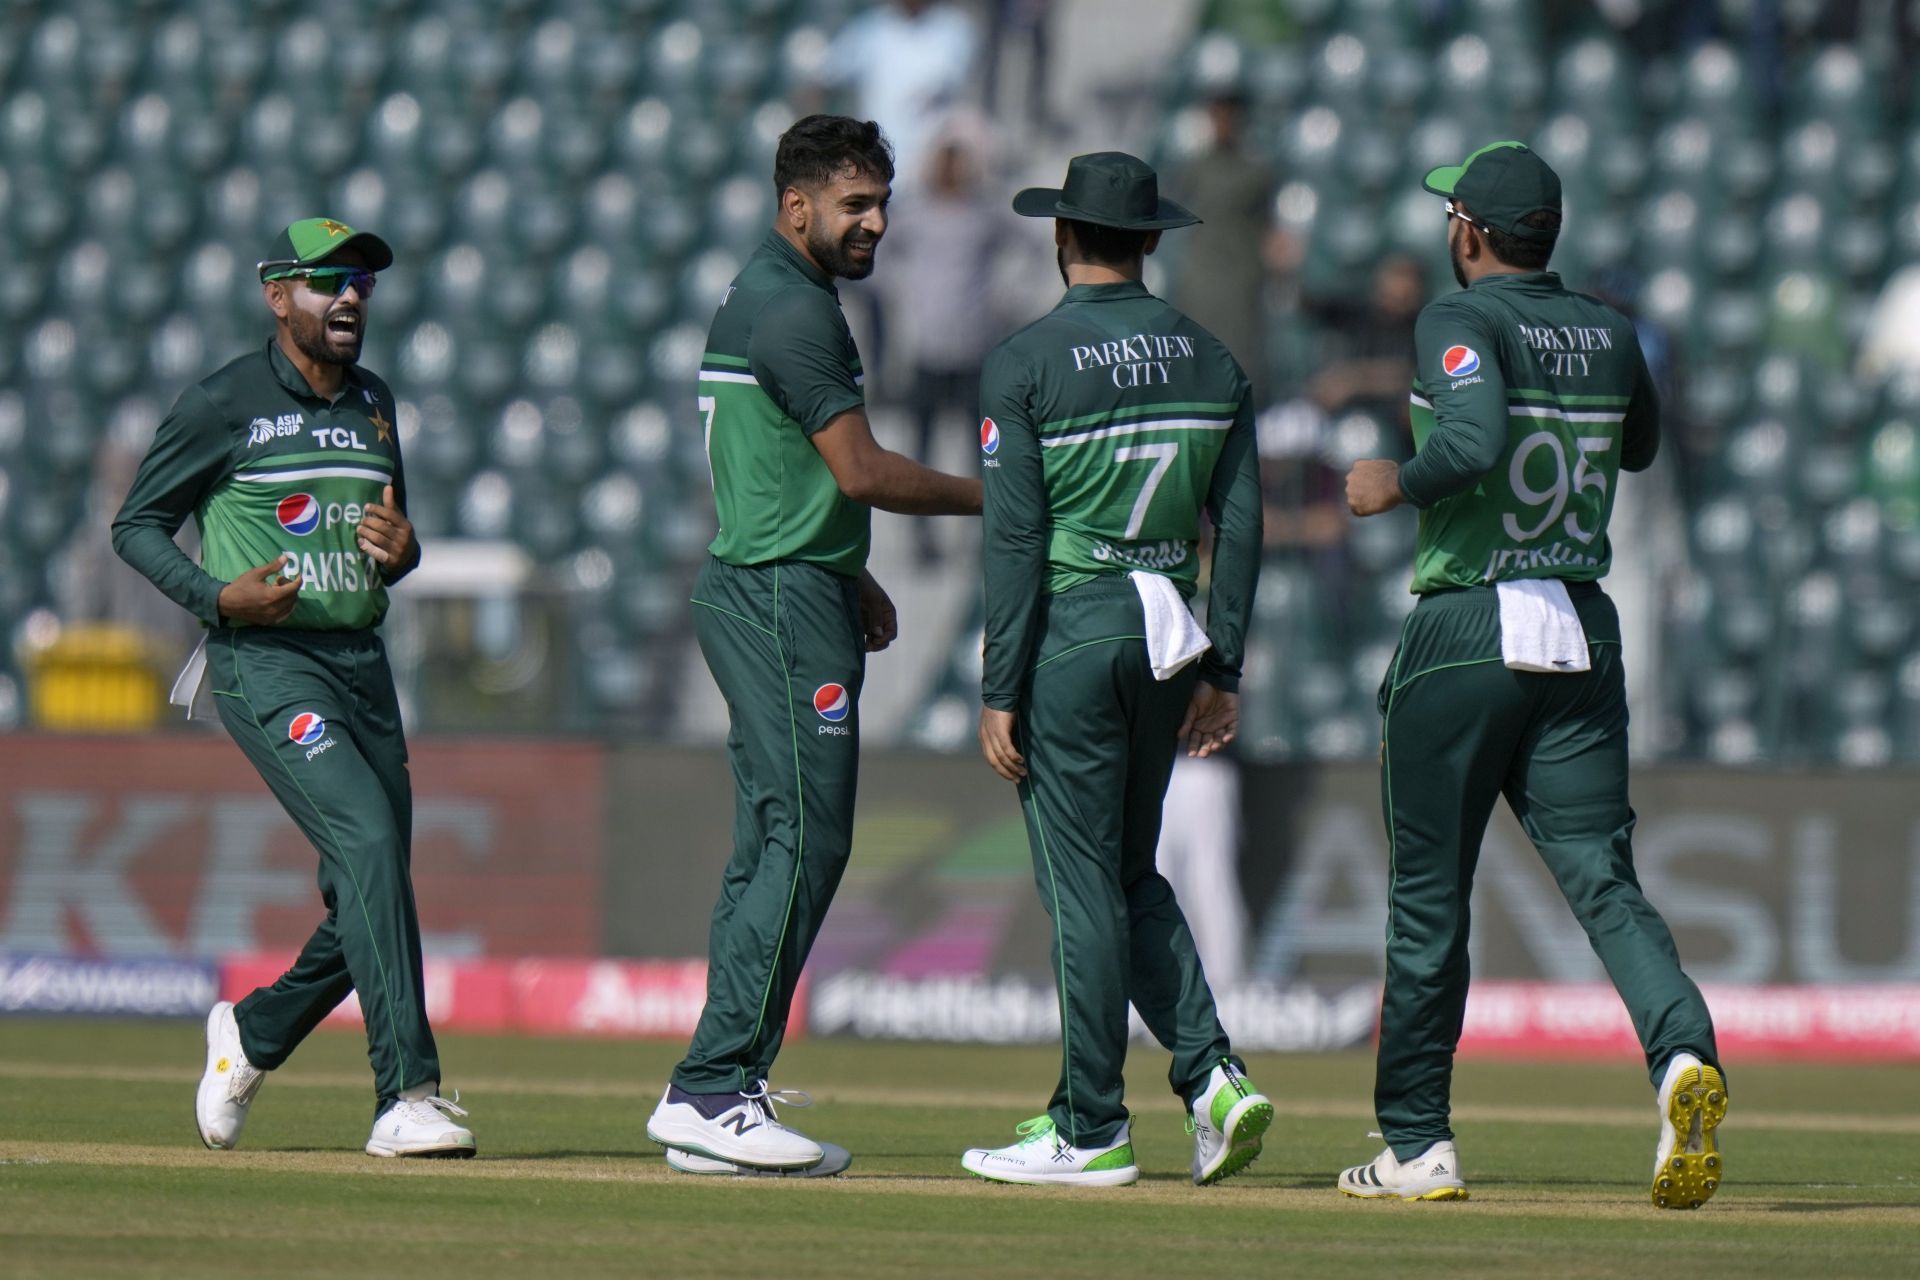 Pakistan are the top-ranked team in ODI cricket. [P/C: AP]